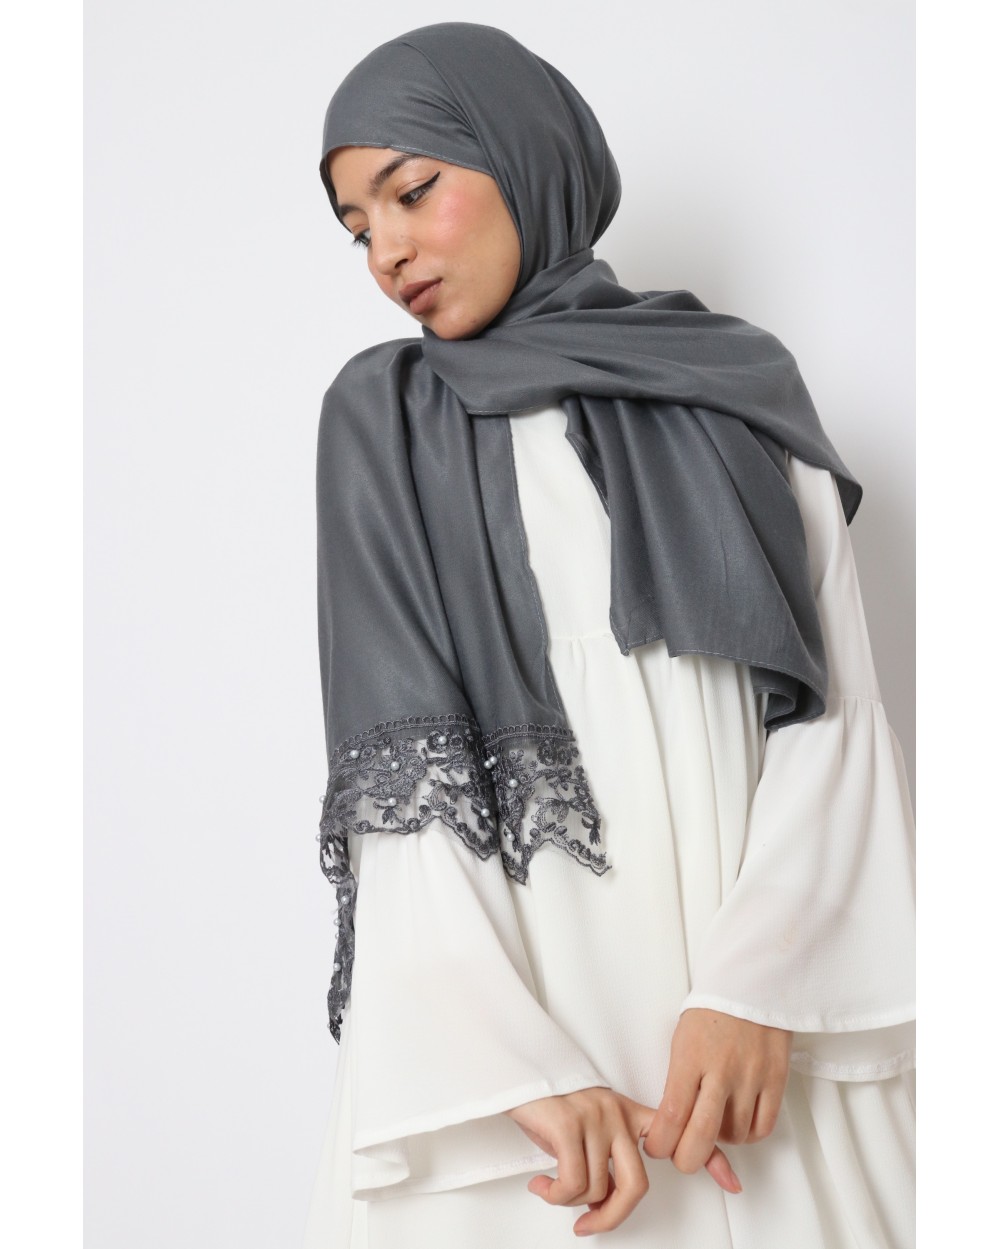 Hijab Maryline with lace